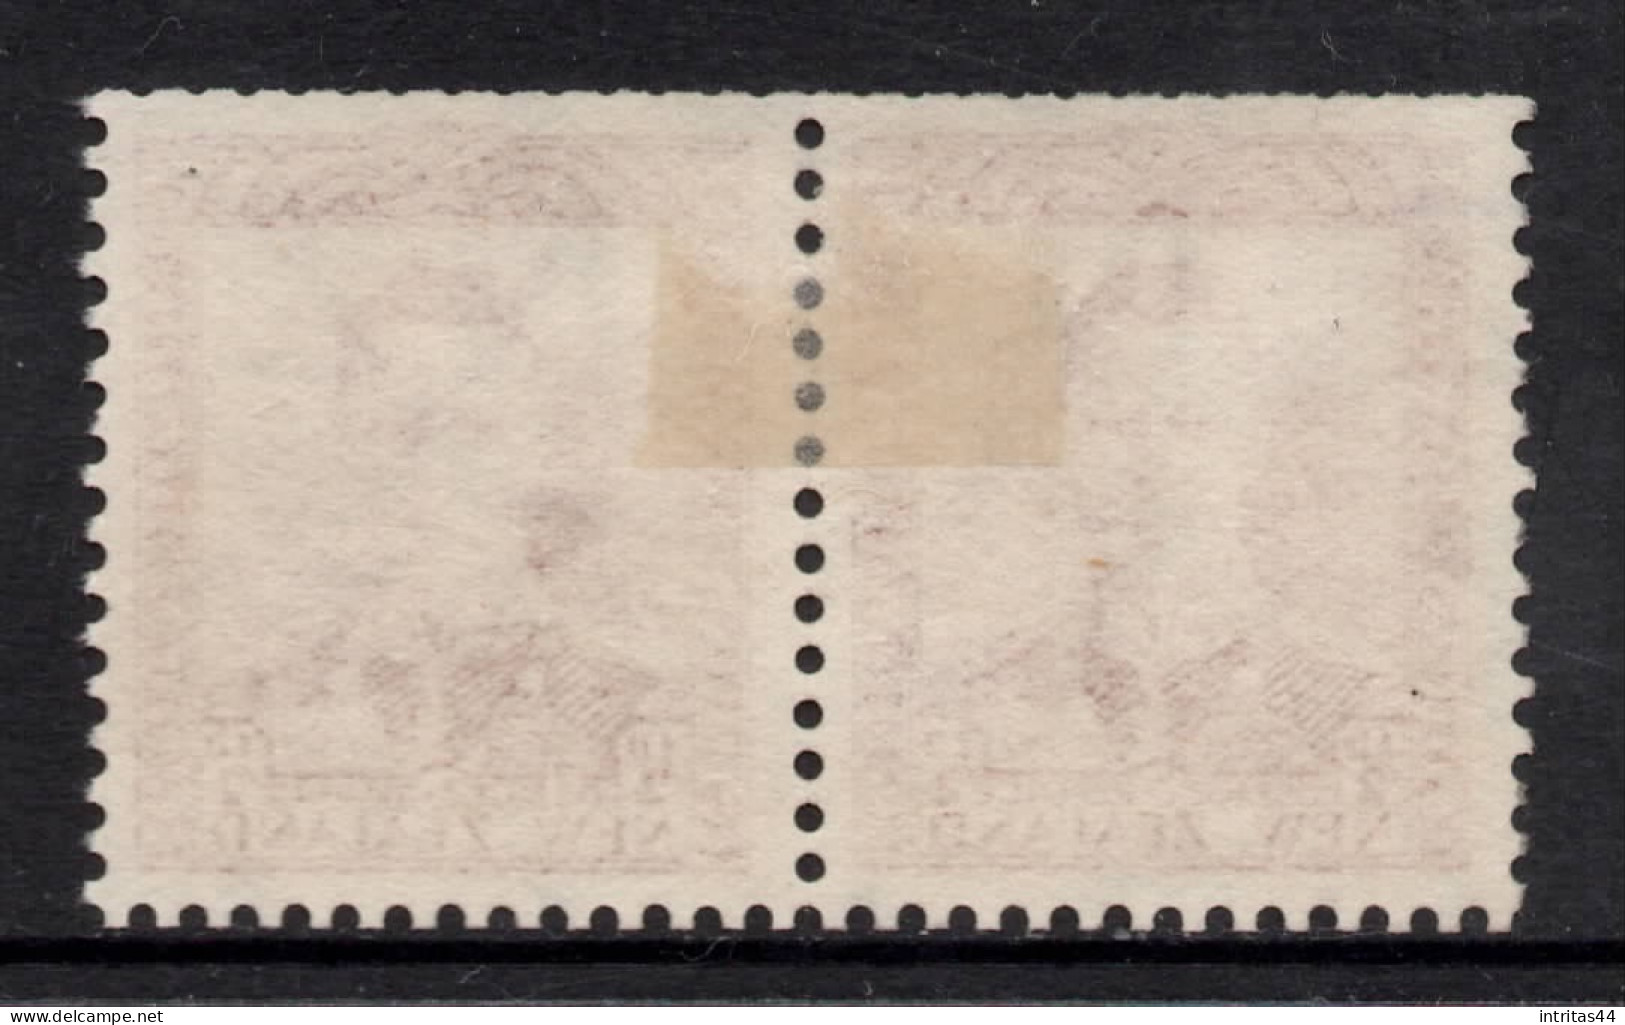 NEW ZEALAND 1938  1/2d  BROWN  " KING GEORGE VI " PAIR MH. - Nuevos